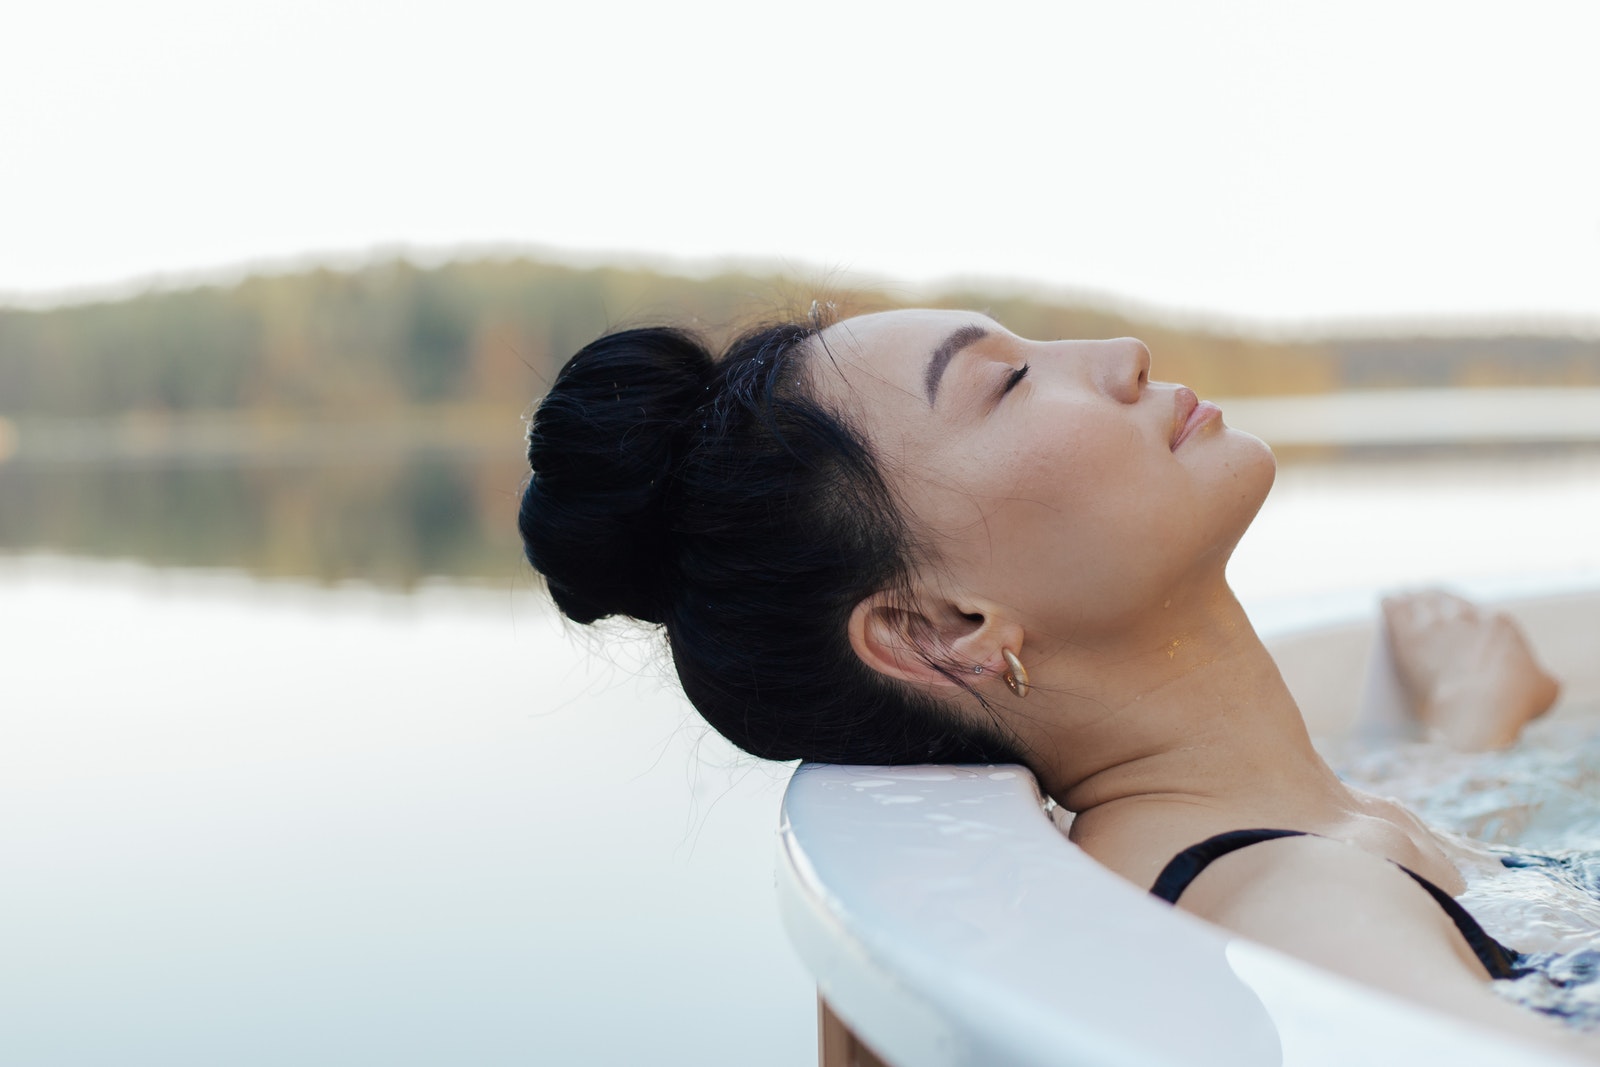 Tips for doing progressive muscle relaxation